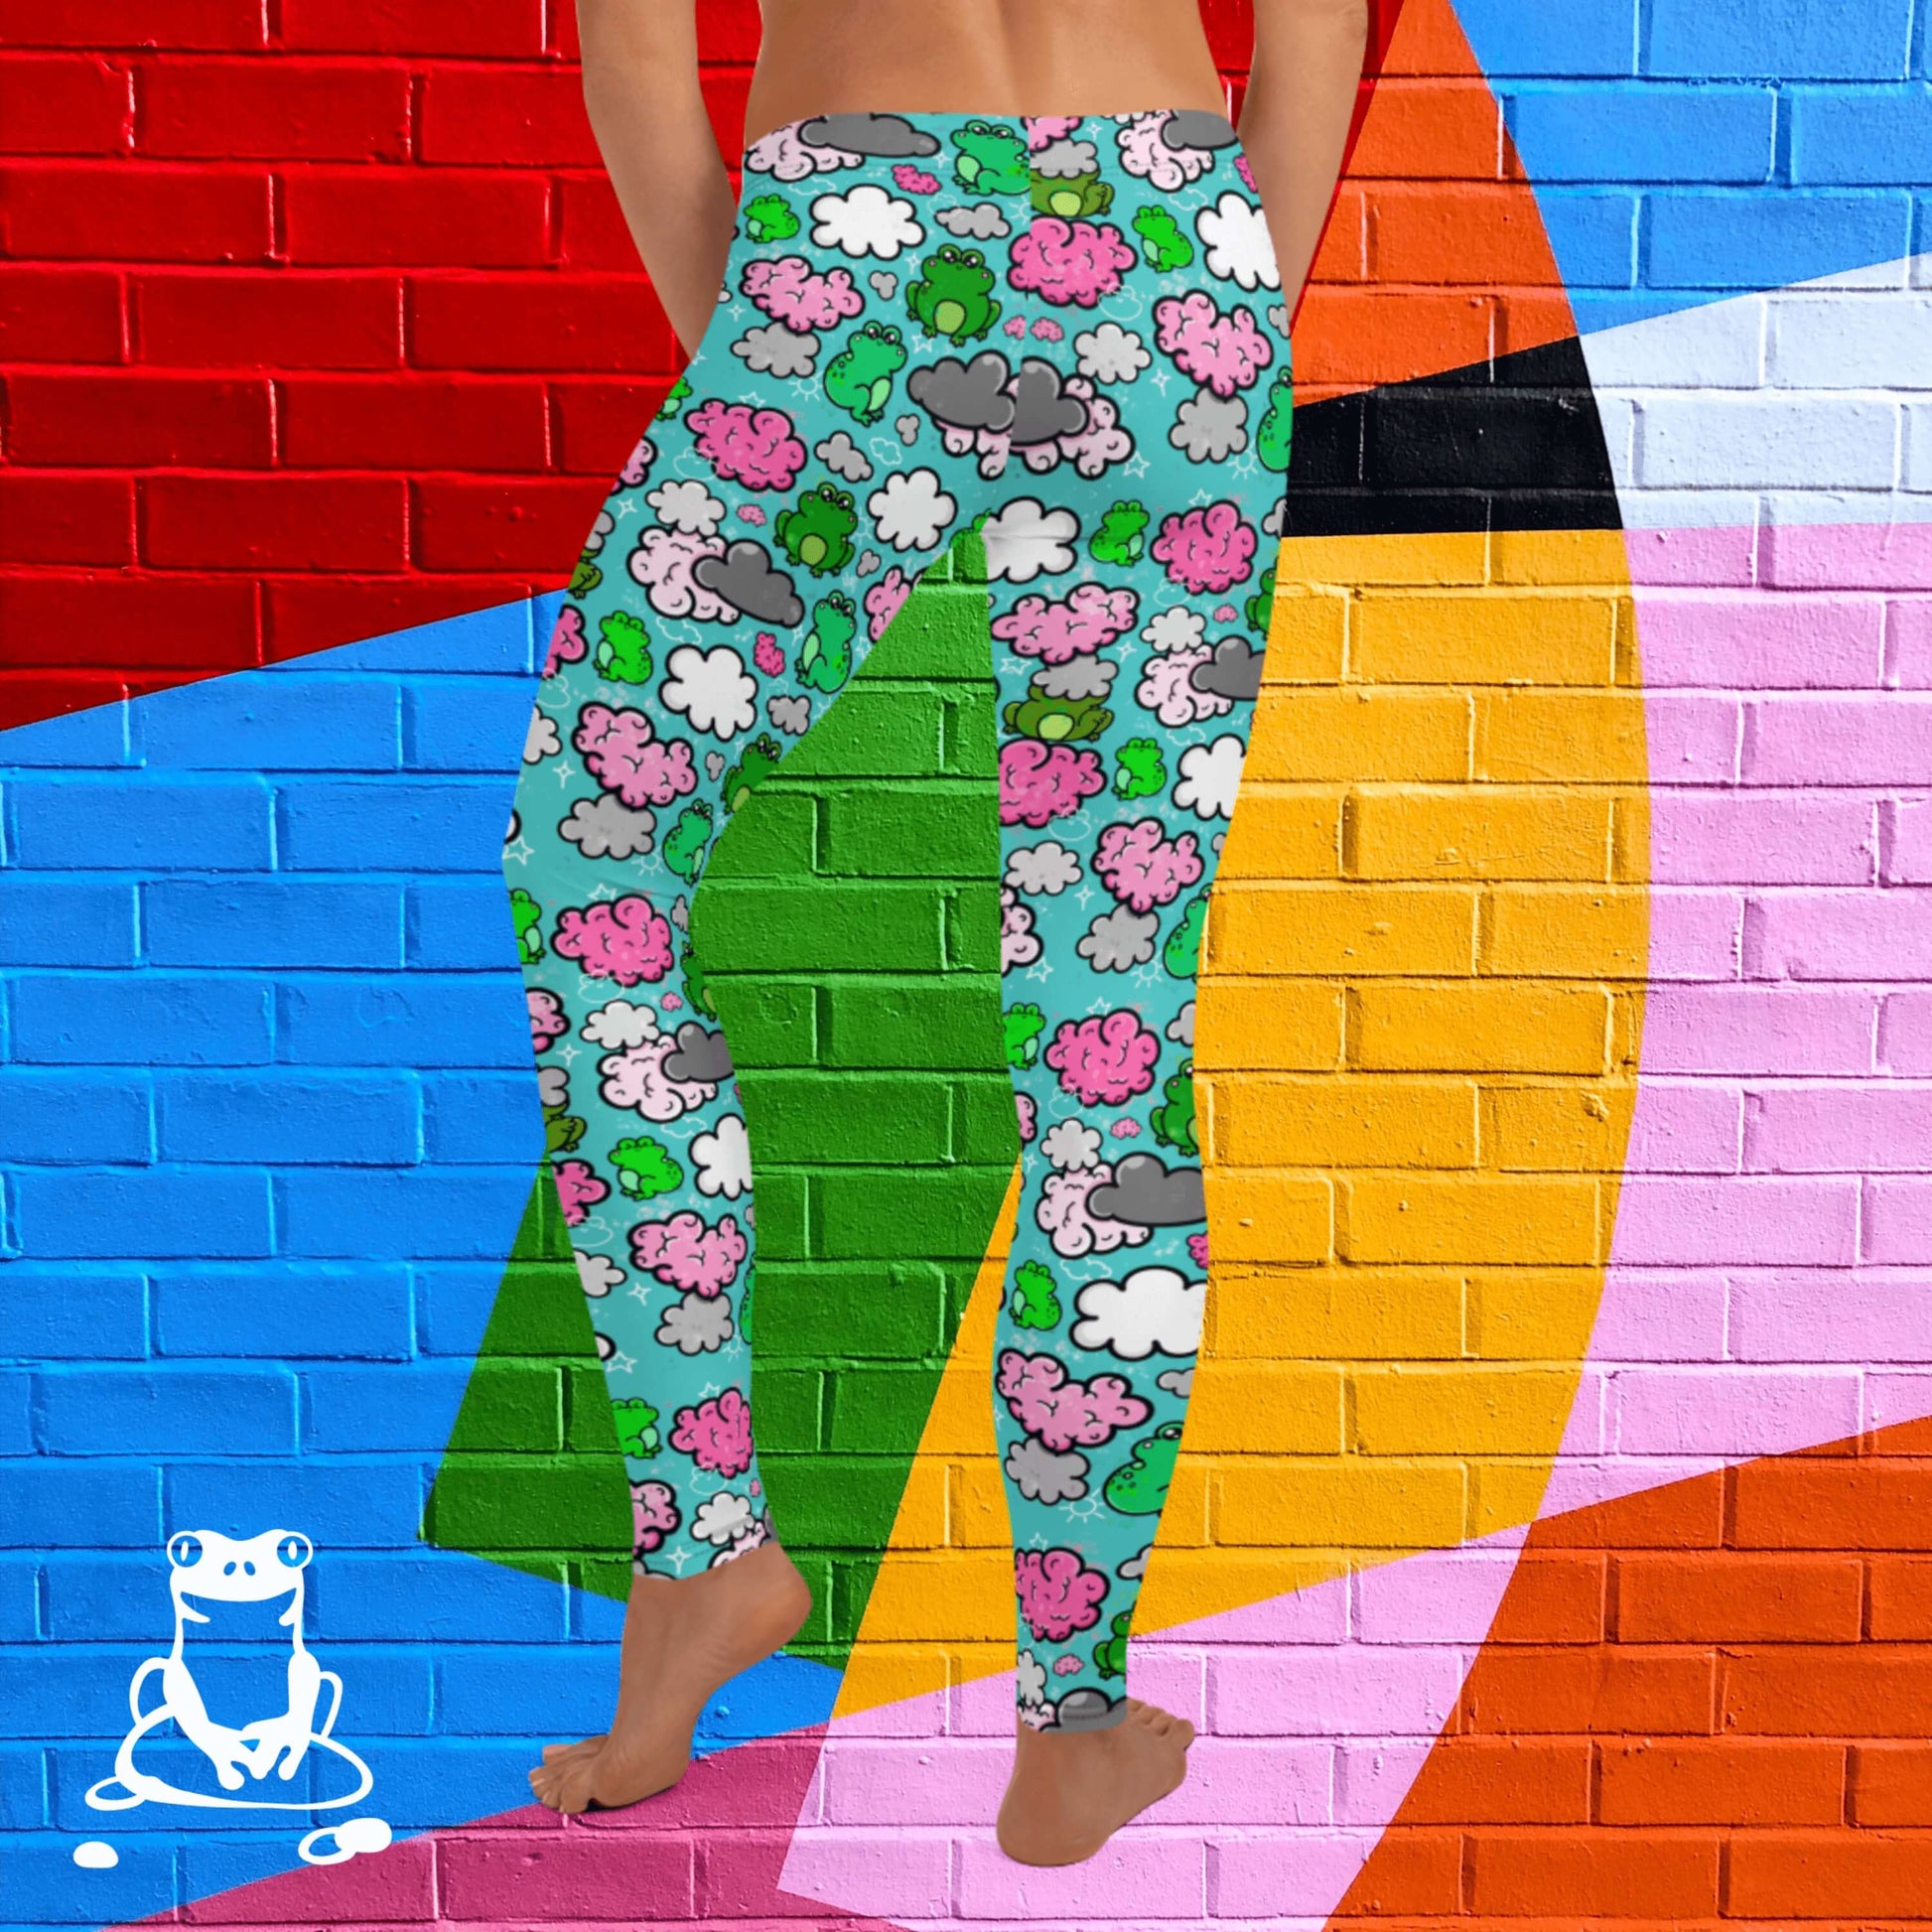 The Brain Frog Leggings - Brain Fog being worn by a model facing away with their left leg bent on a rainbow brick background, the photo is cropped from the hips down. The leggings are an aqua blue base with various green kawaii face frogs with pink blush cheeks, pink brain style clouds, white and grey clouds and white sparkles all over. The design was created to raise awareness of Brain Fog.